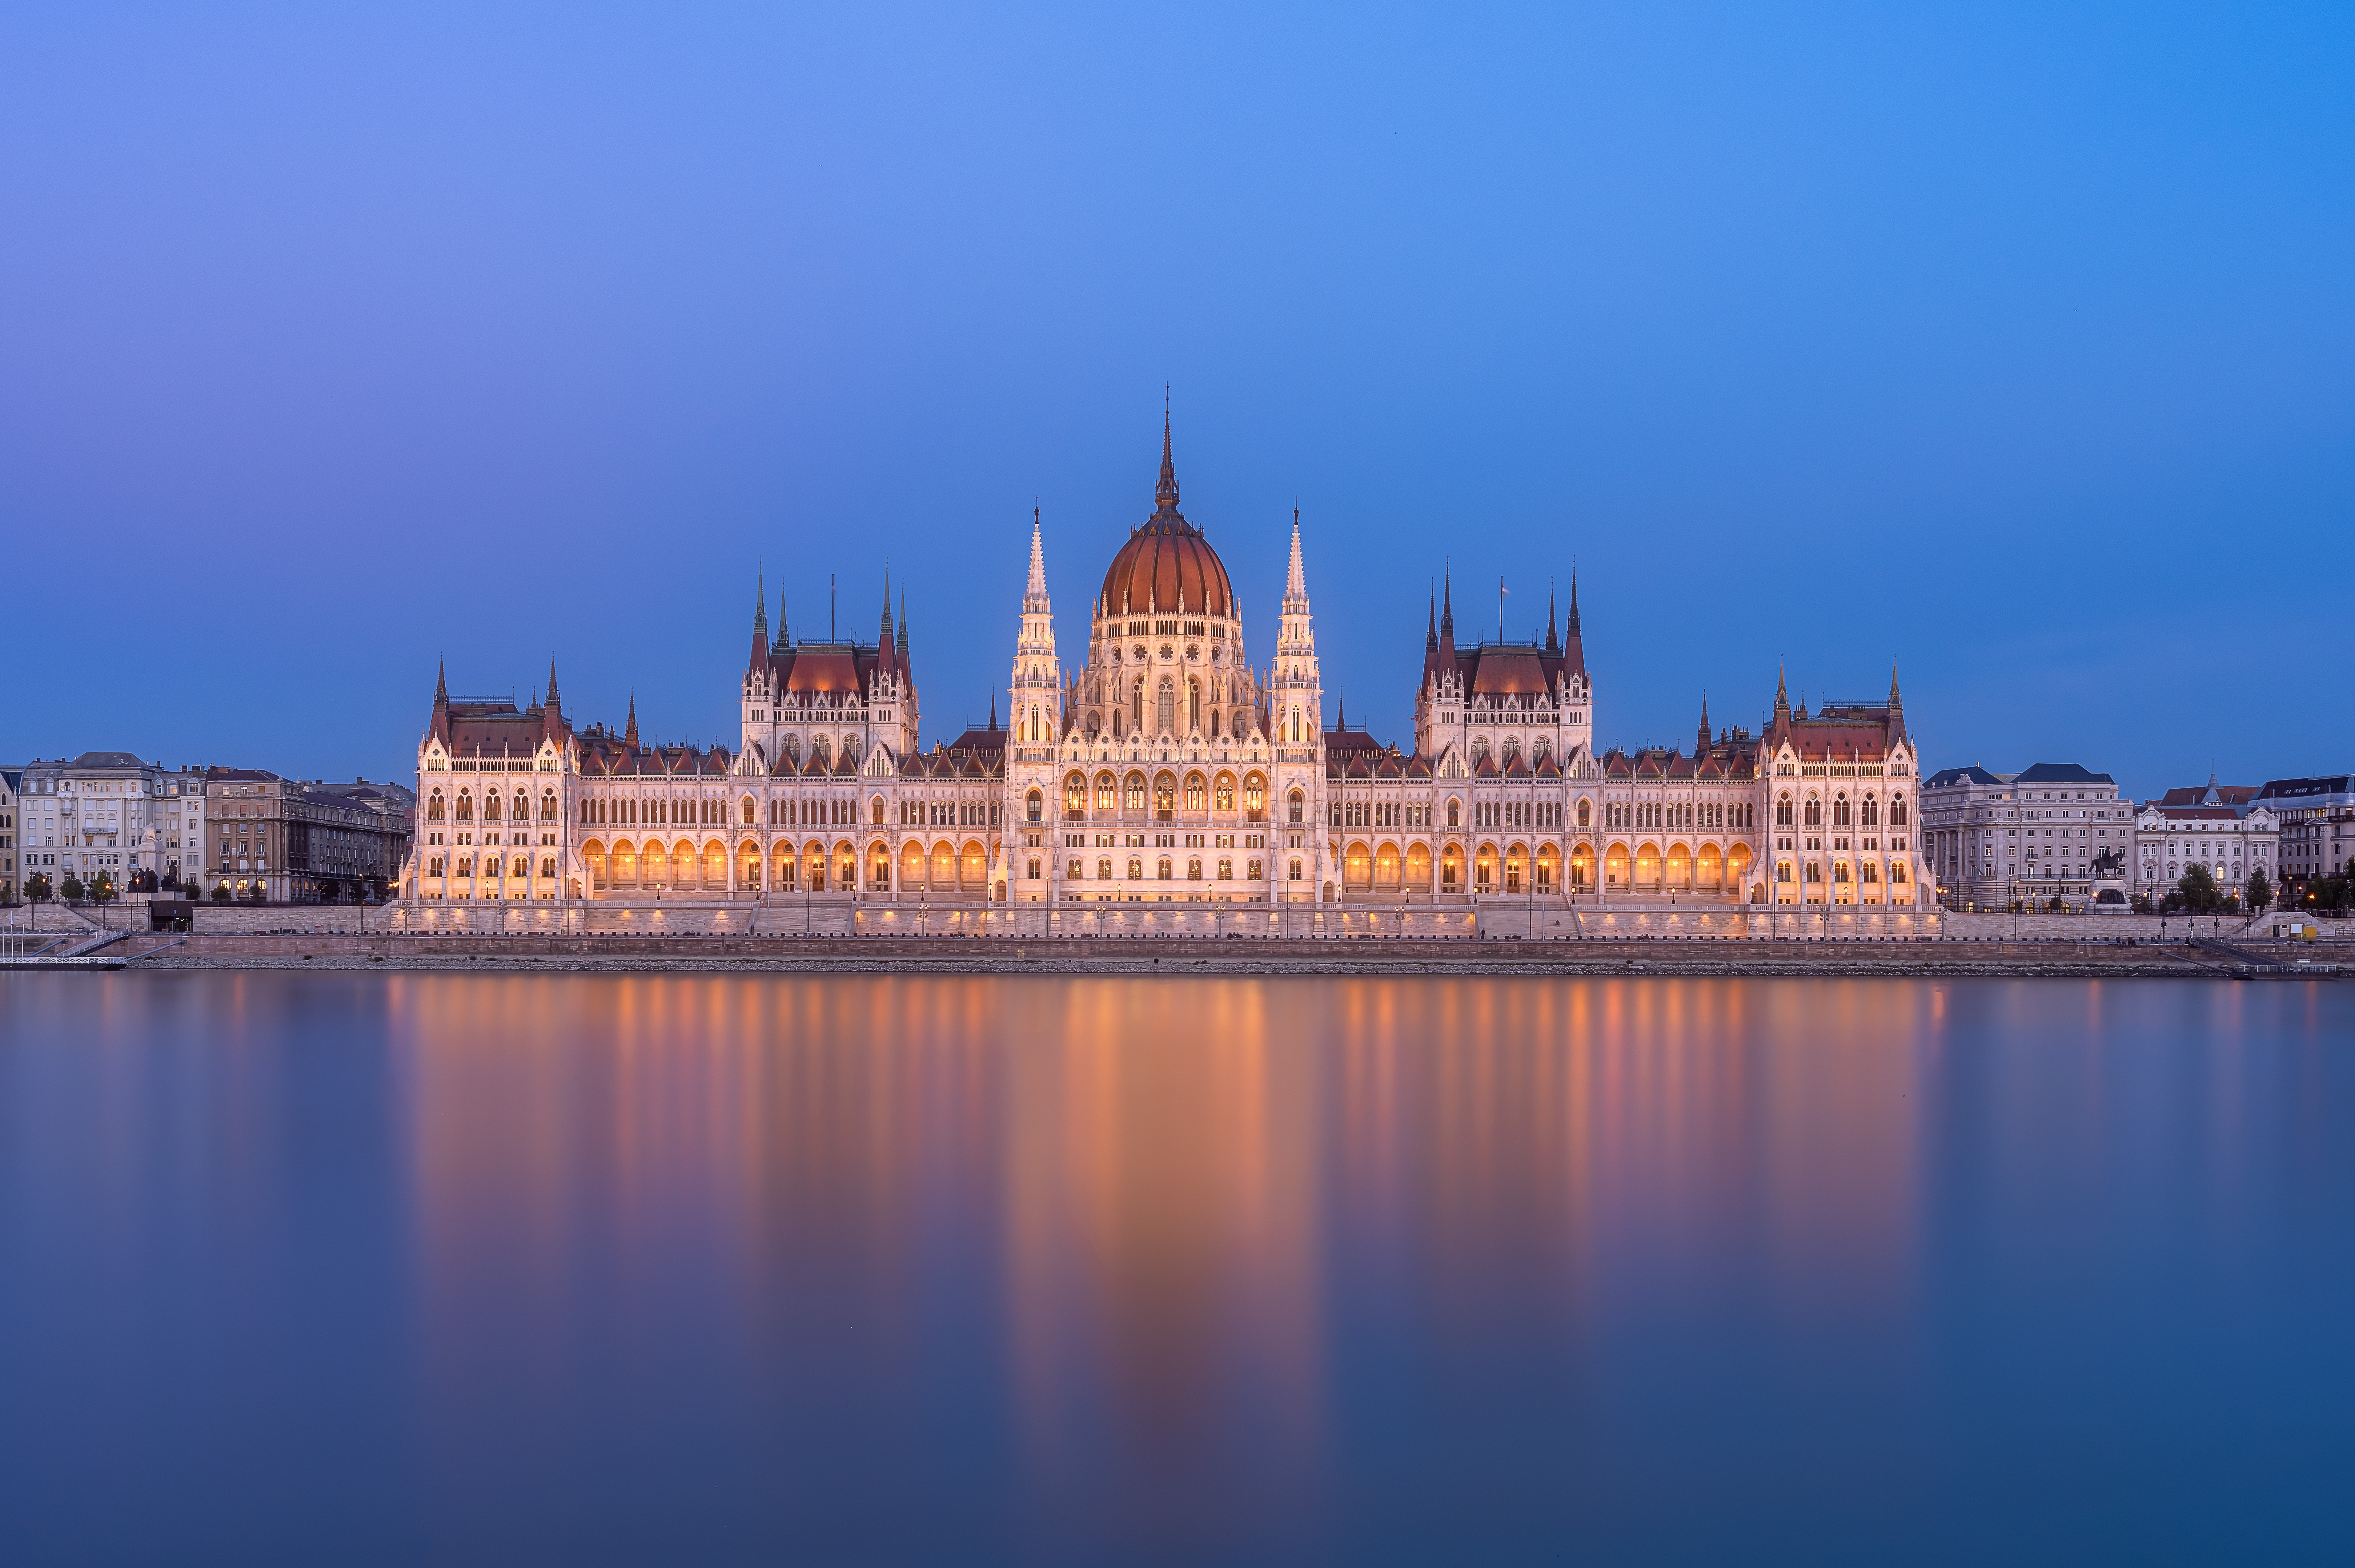 An iconic view of Budapest Parliament taken before sunrise.